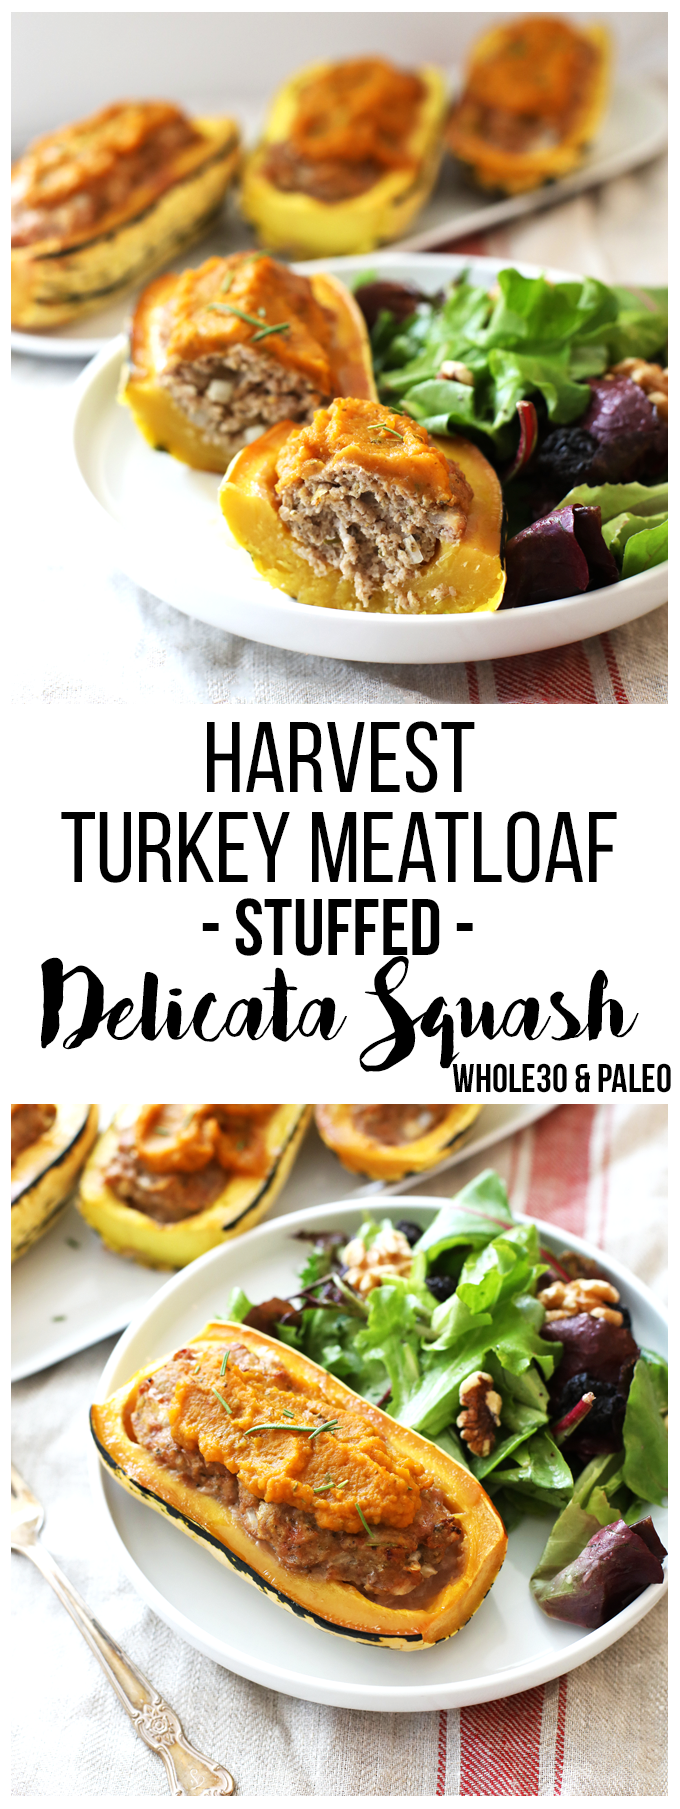 This Harvest Turkey Meatloaf Stuffed Delicata Squash is the perfect fall time meal! It is whole30, paleo and so easy to throw together!